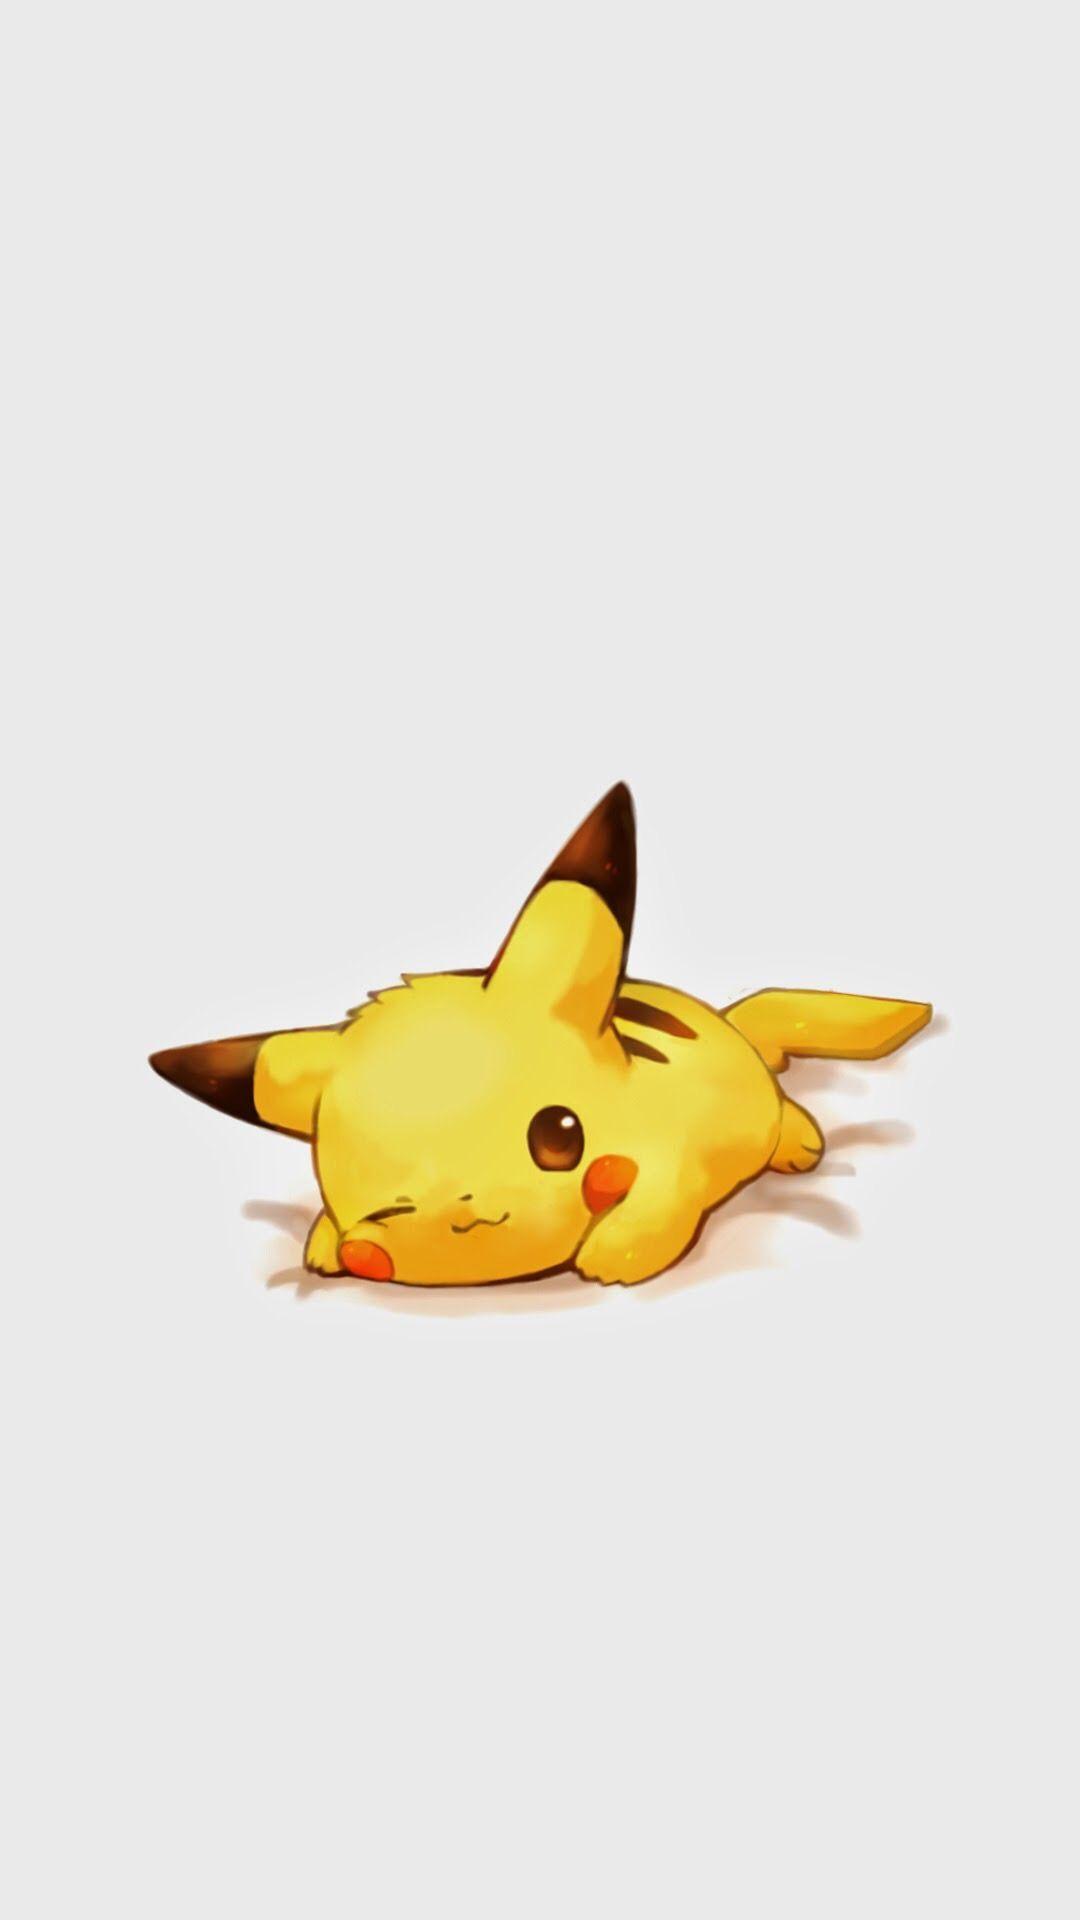 Great 9 Pikachu Wallpaper For Your Android or iPhone Wallpaper #android #iphone #wallpaper. Pikachu wallpaper, Cute pokemon wallpaper, Cute pokemon